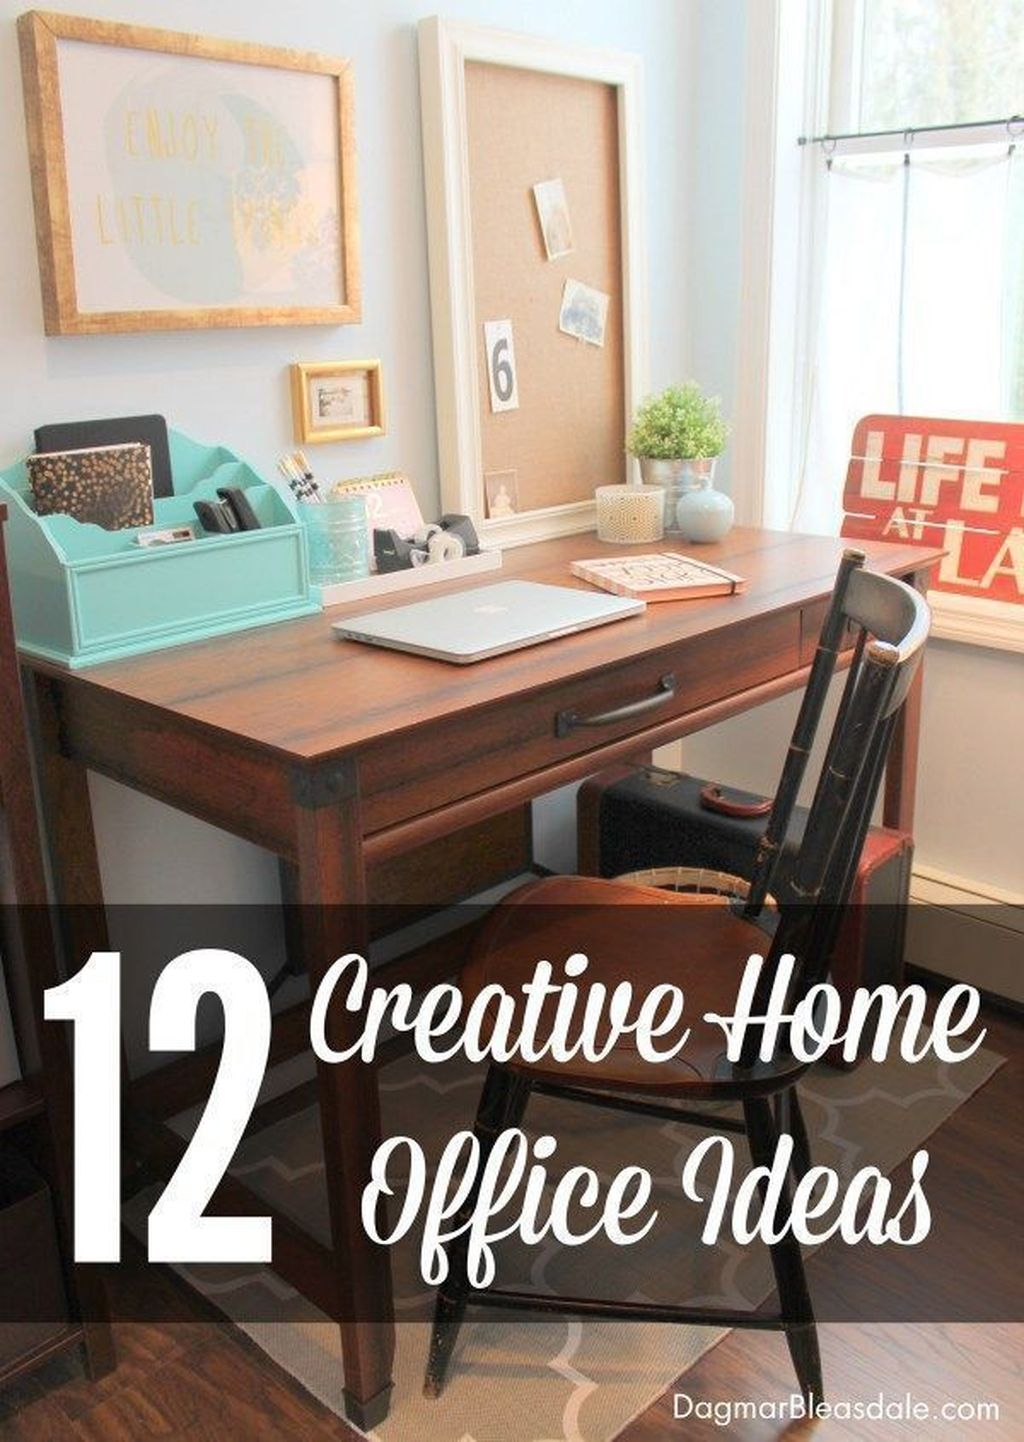 Diy Awesome Home Office Organizing Ideas33